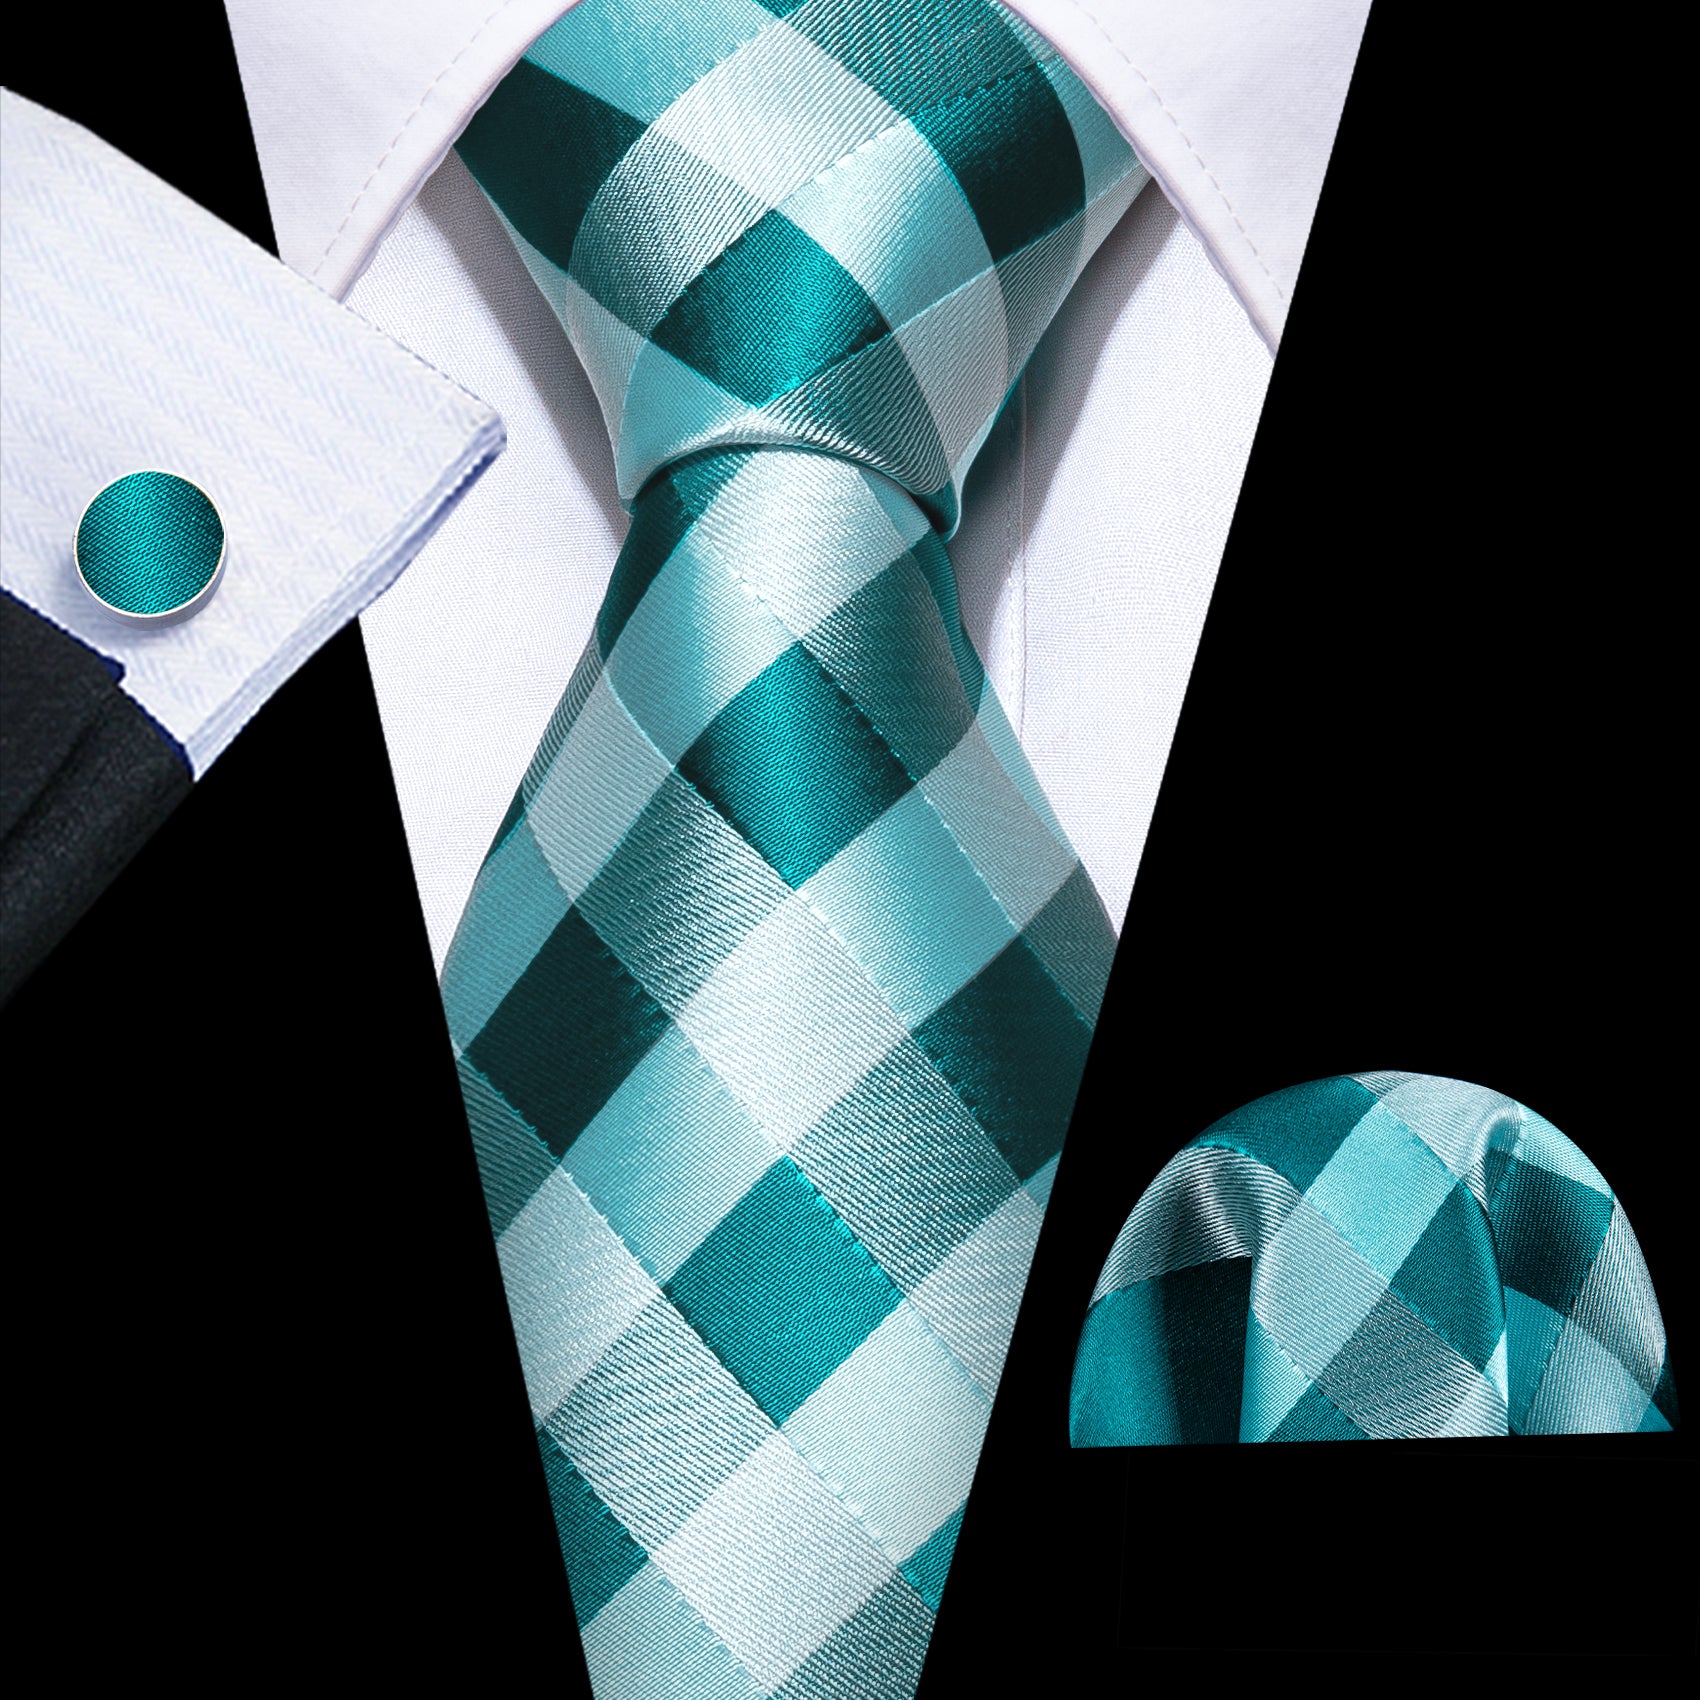 Barry wang teal green plaid checkered necktie for men's dress suit 